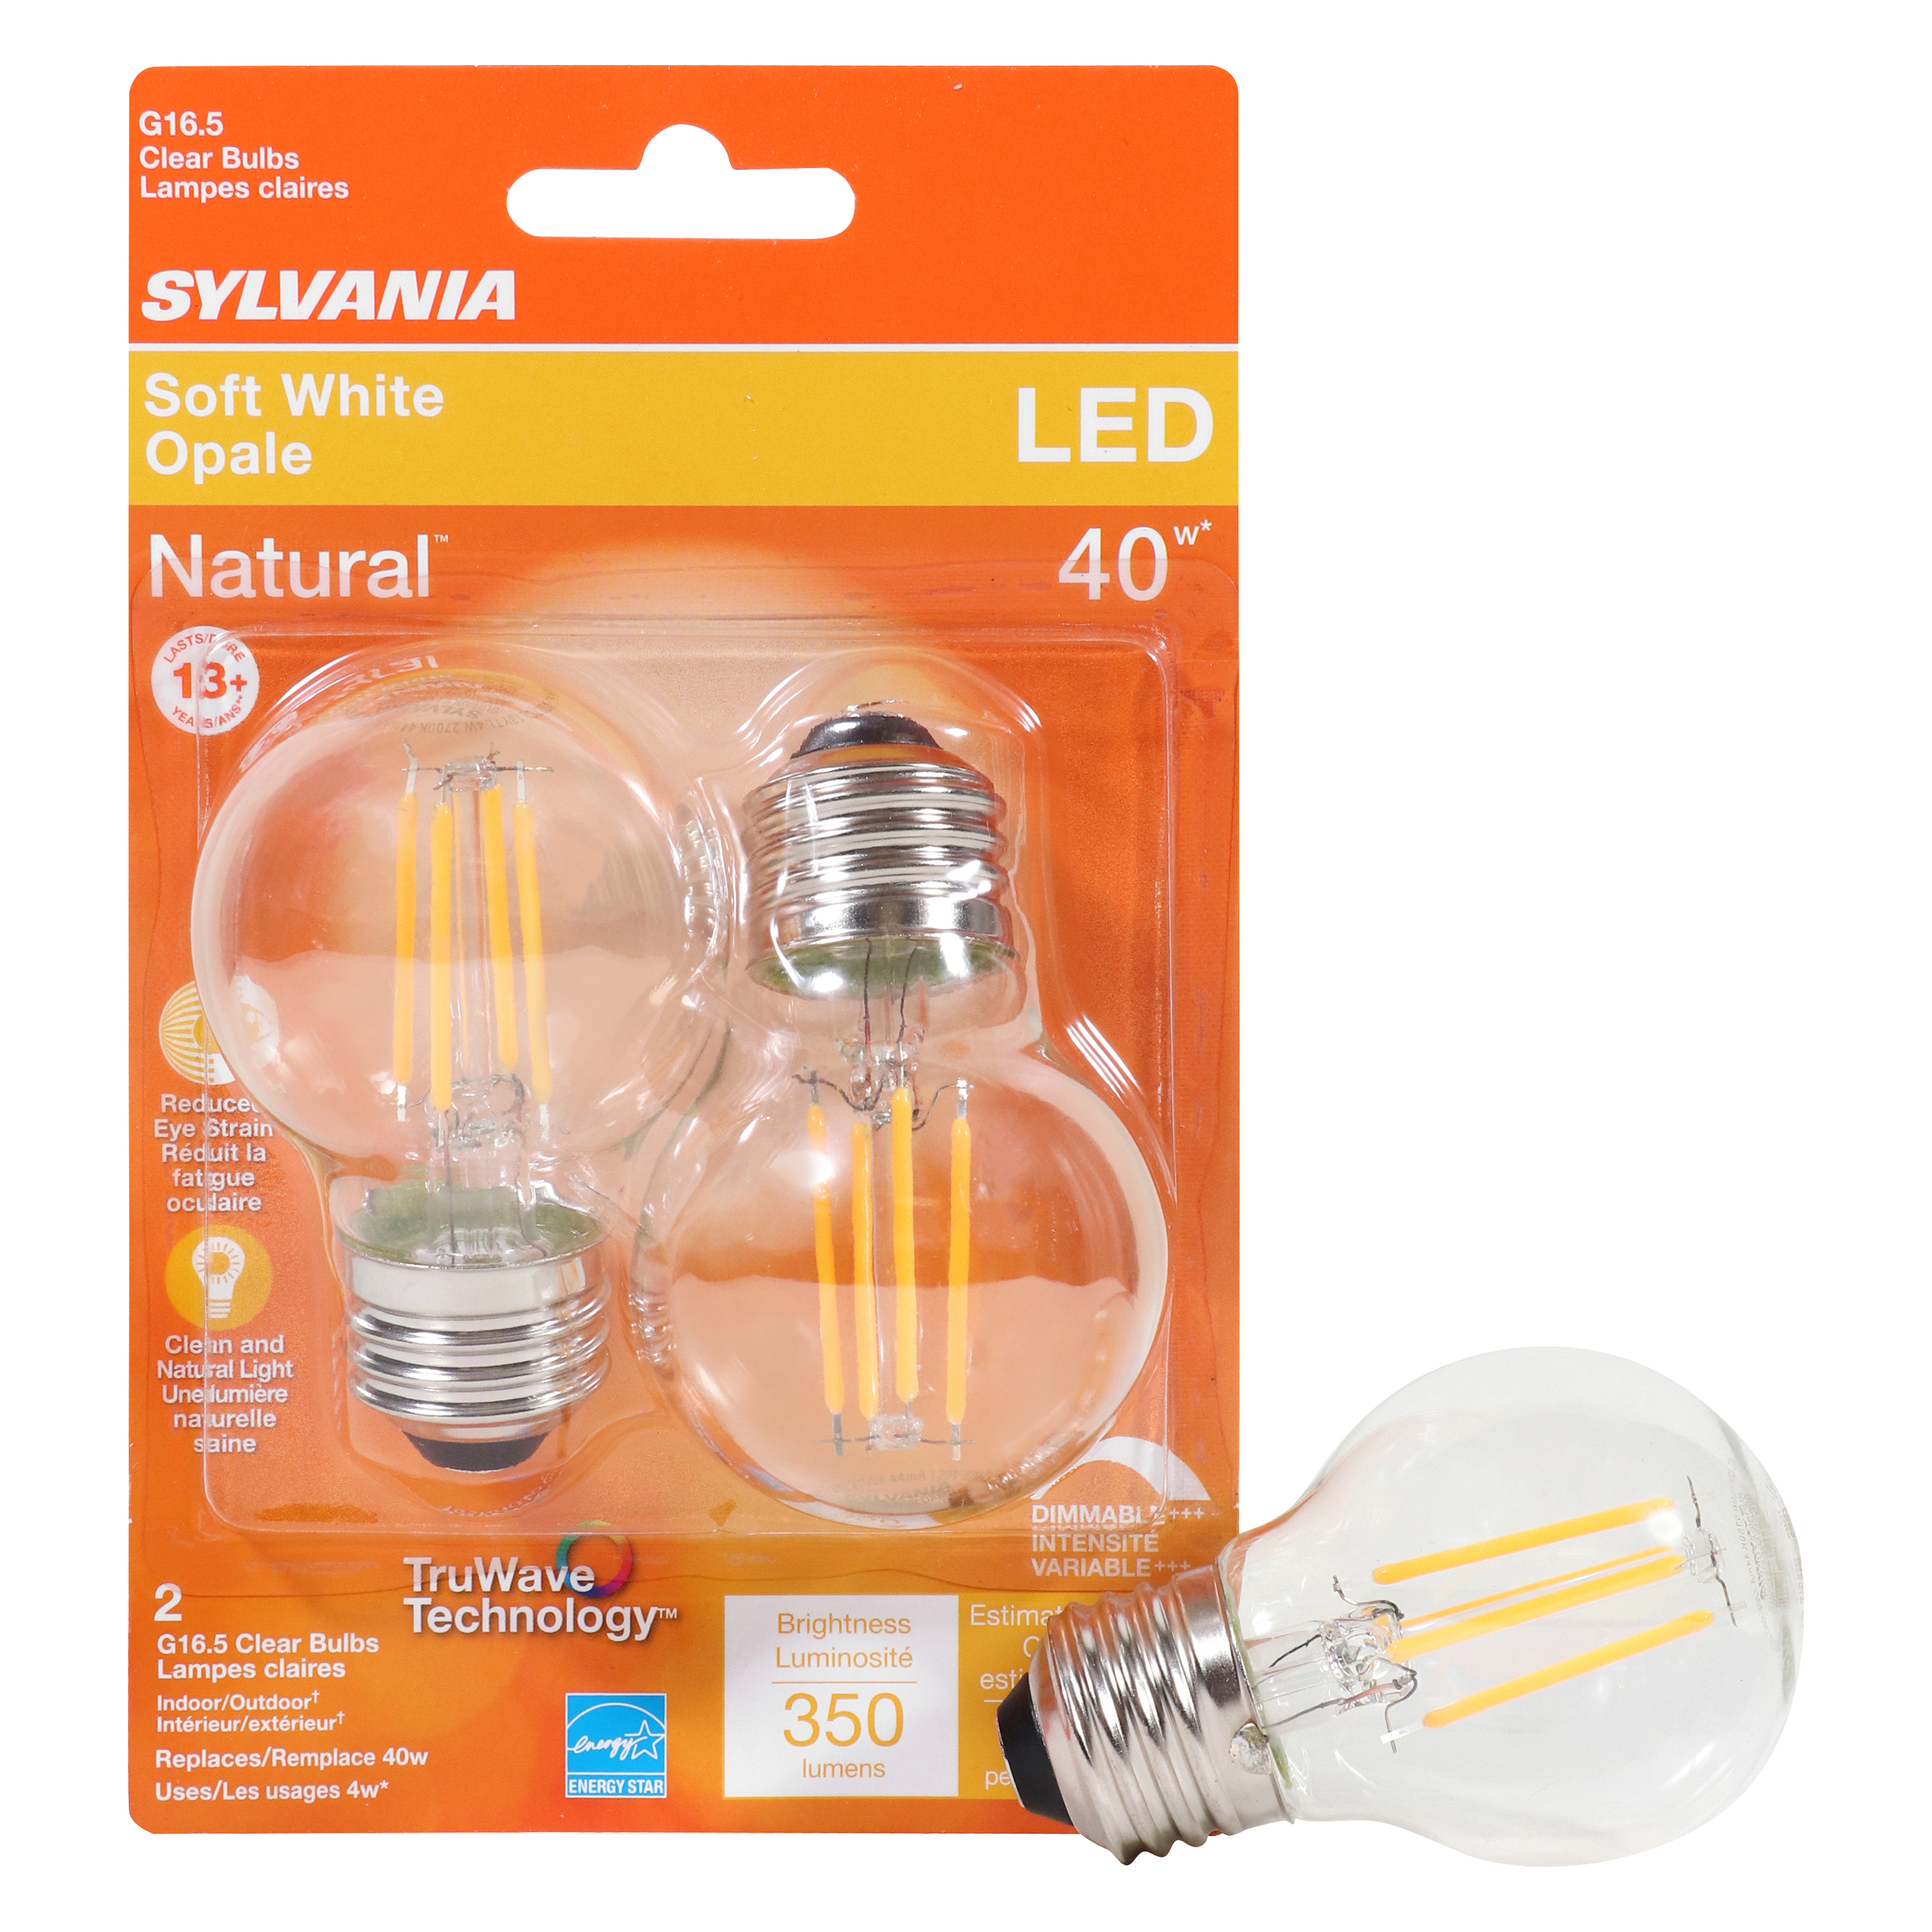 40847 Natural LED Bulb, Globe, G16.5 Lamp, 40 W Equivalent, E26 Lamp Base, Dimmable, Clear, Soft White Light